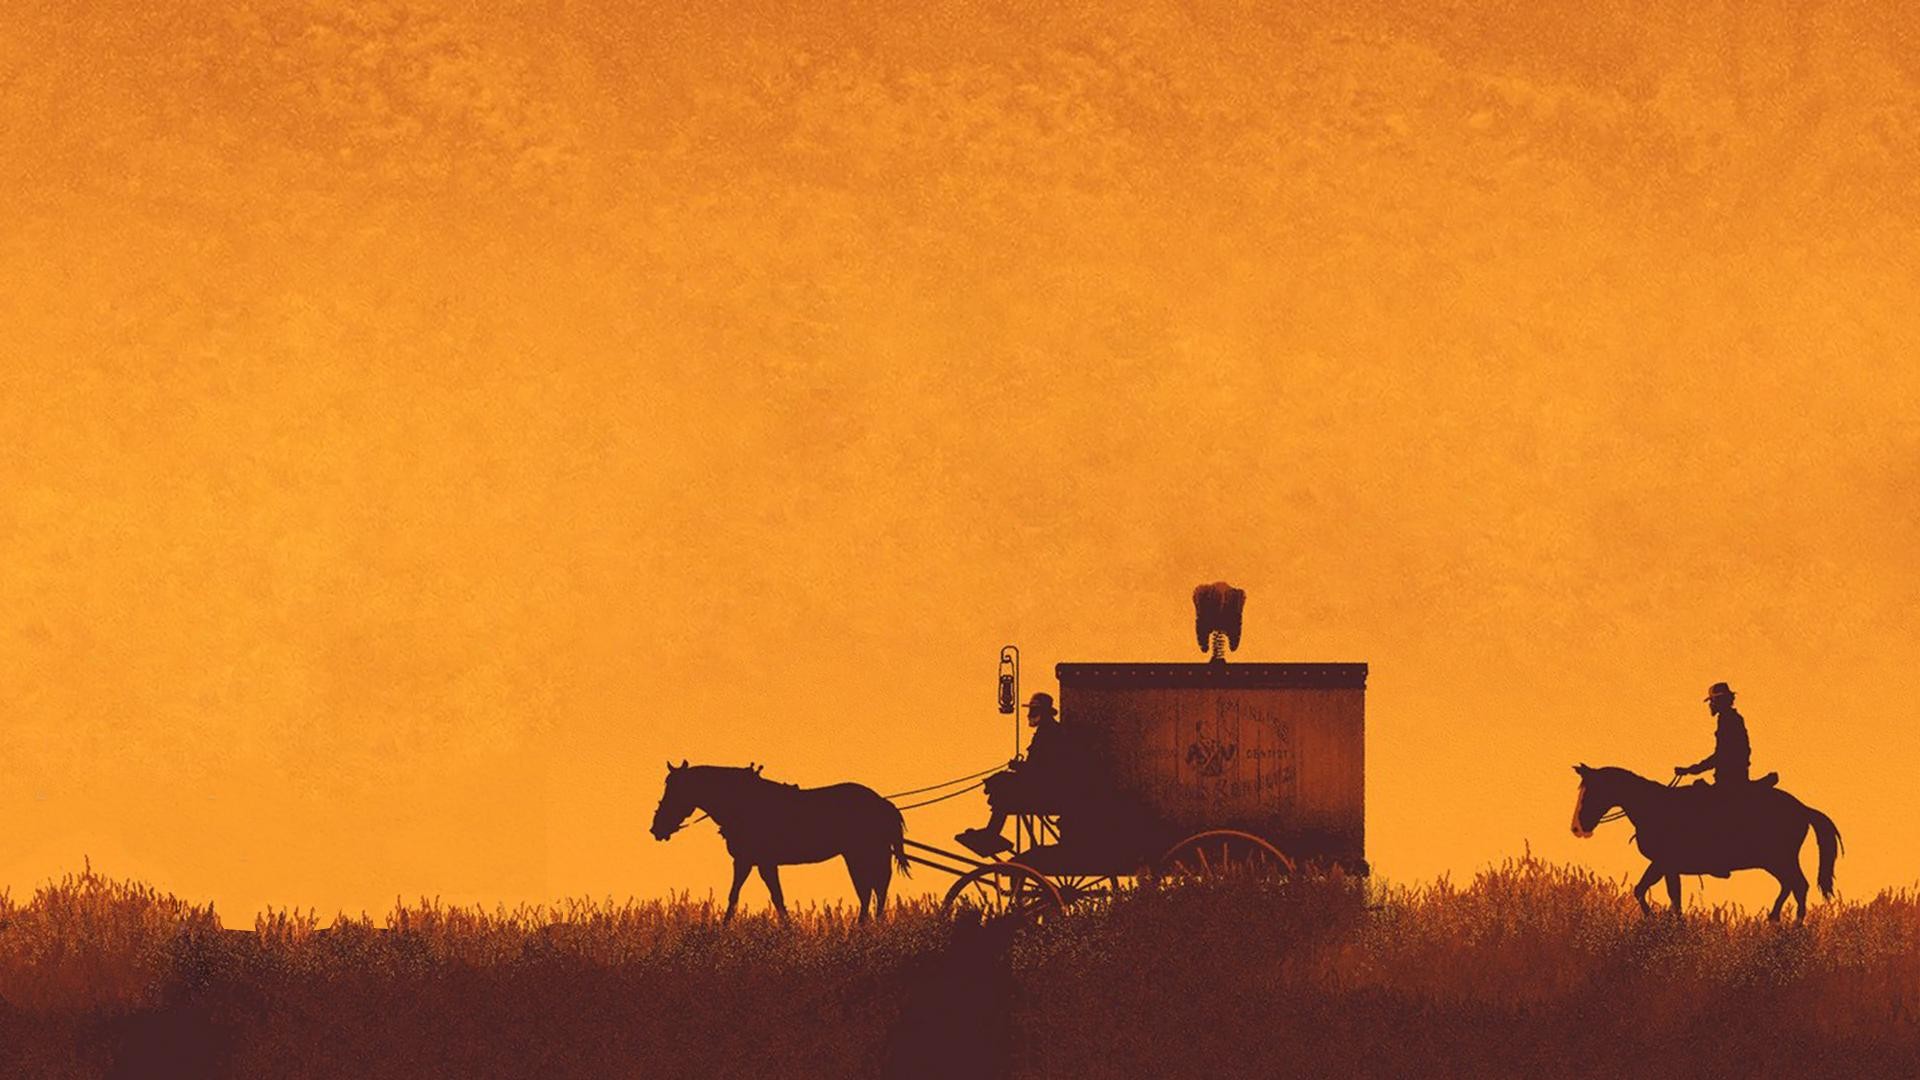 Carriage Orange Django Unchained Horse Movies Quentin